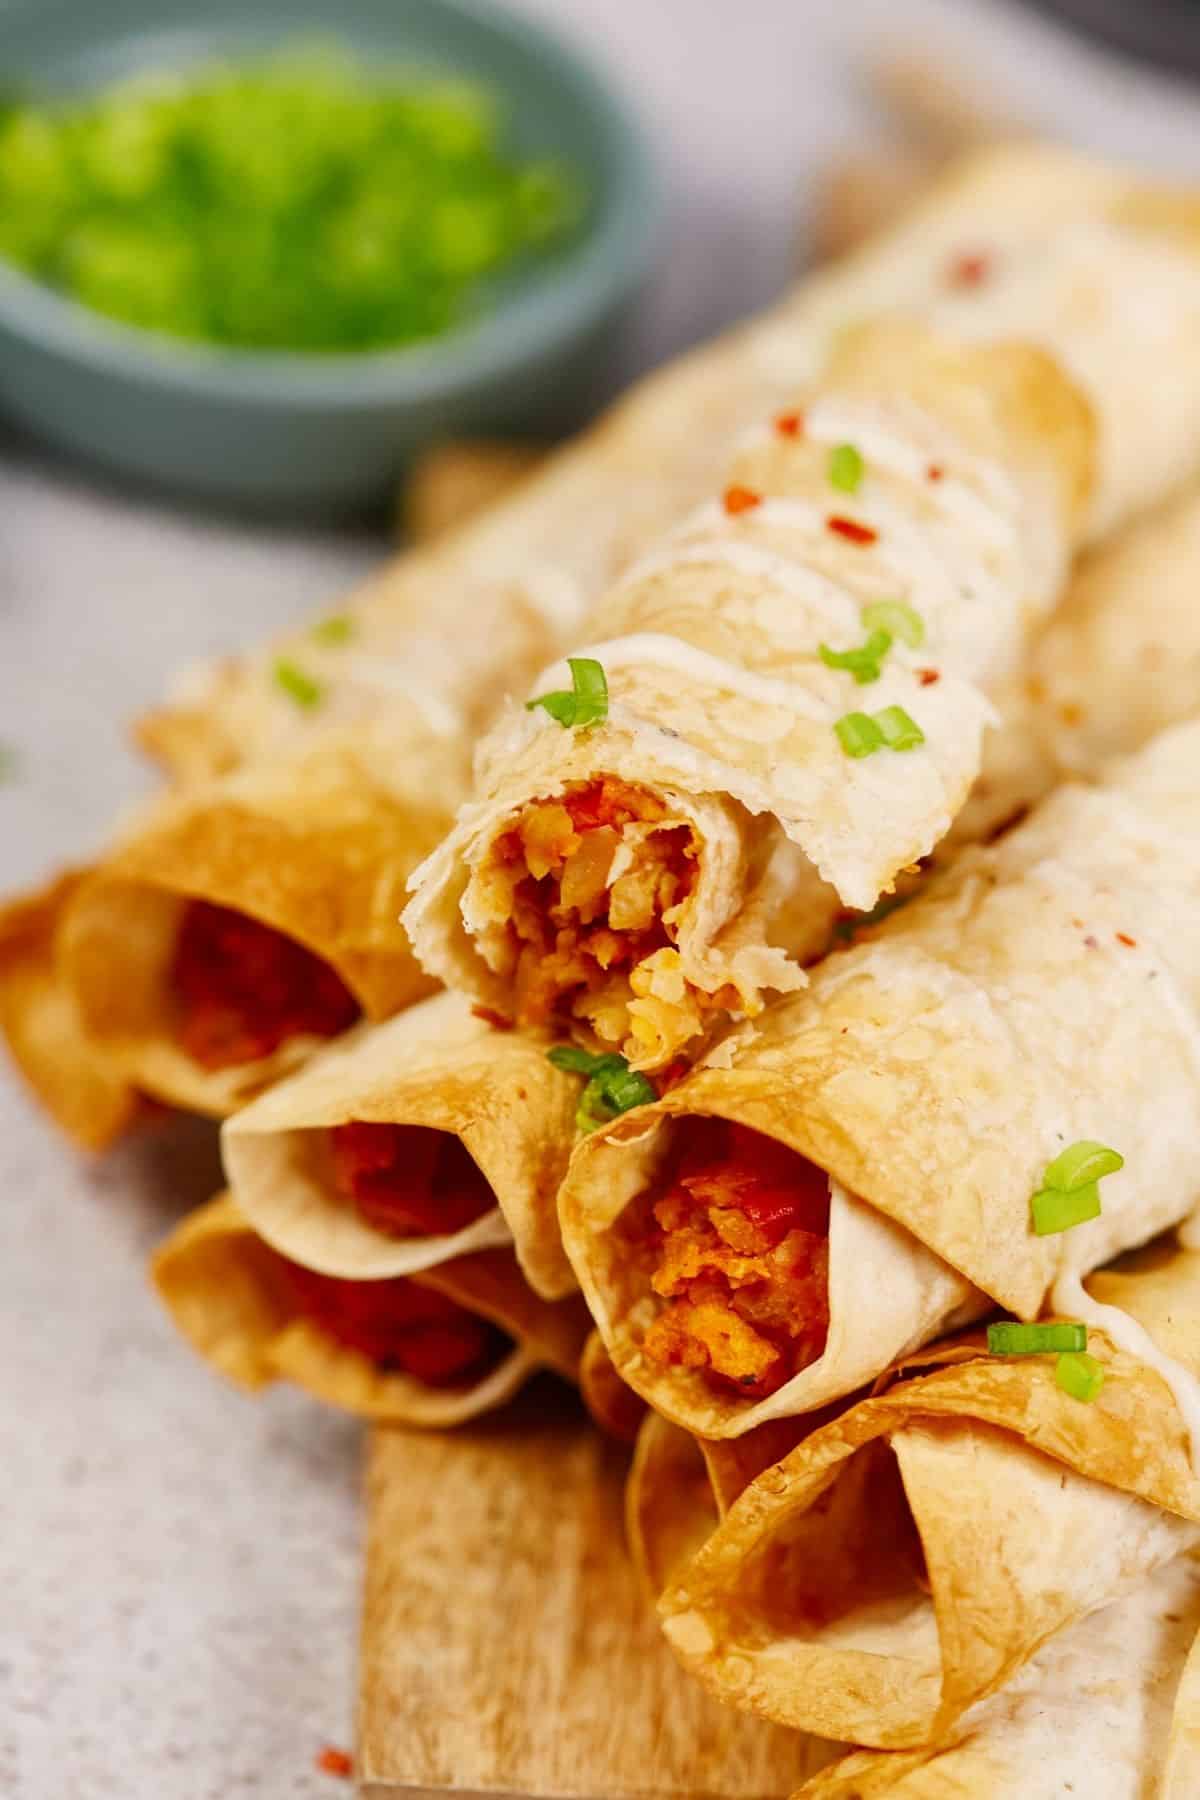 vegan taquitos on top of wood platter by blue bowl of green herbs